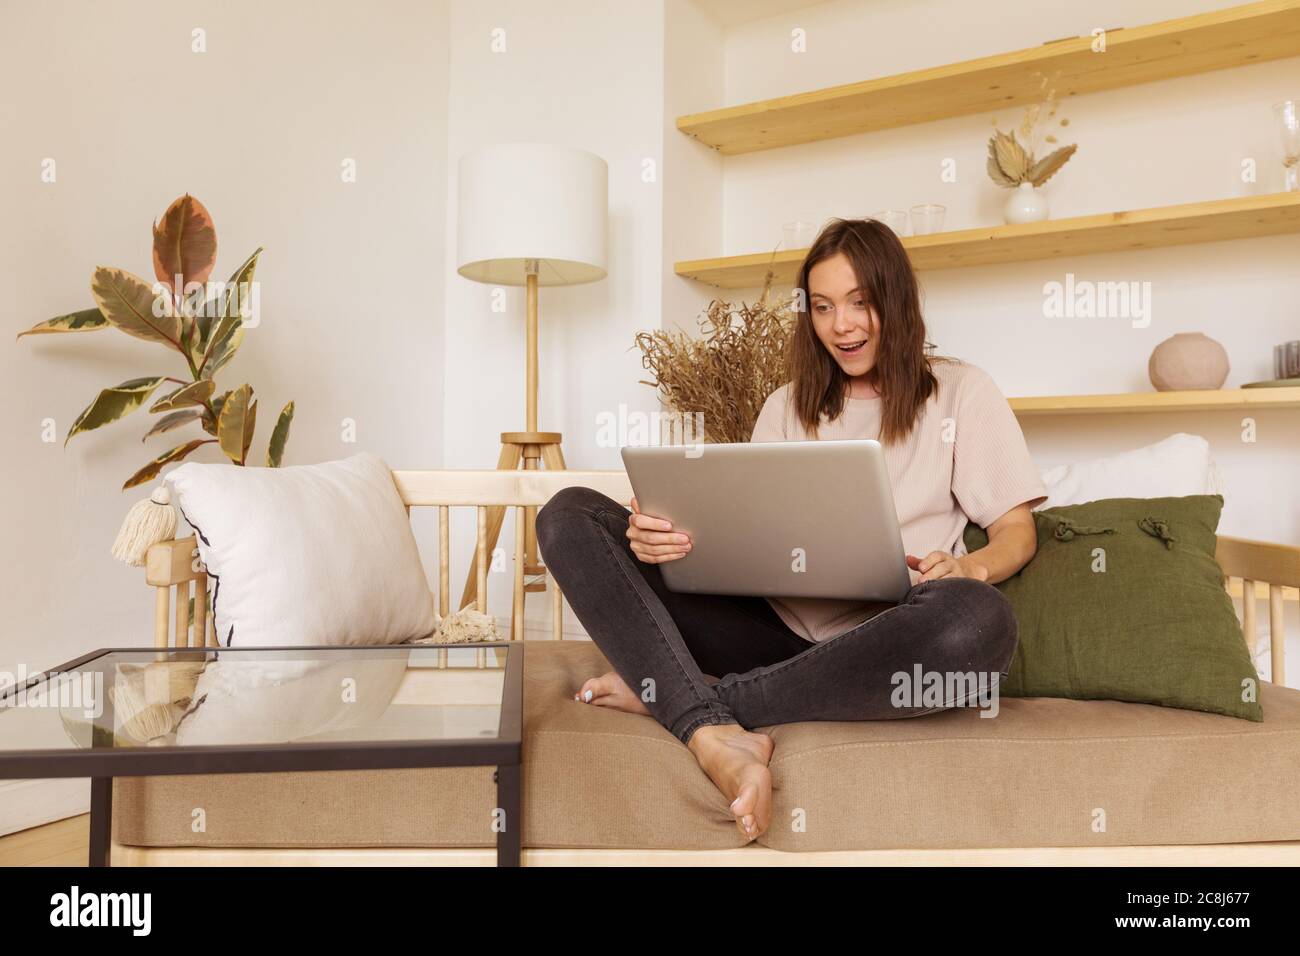 Excited woman using laptop on sofa Stock Photo